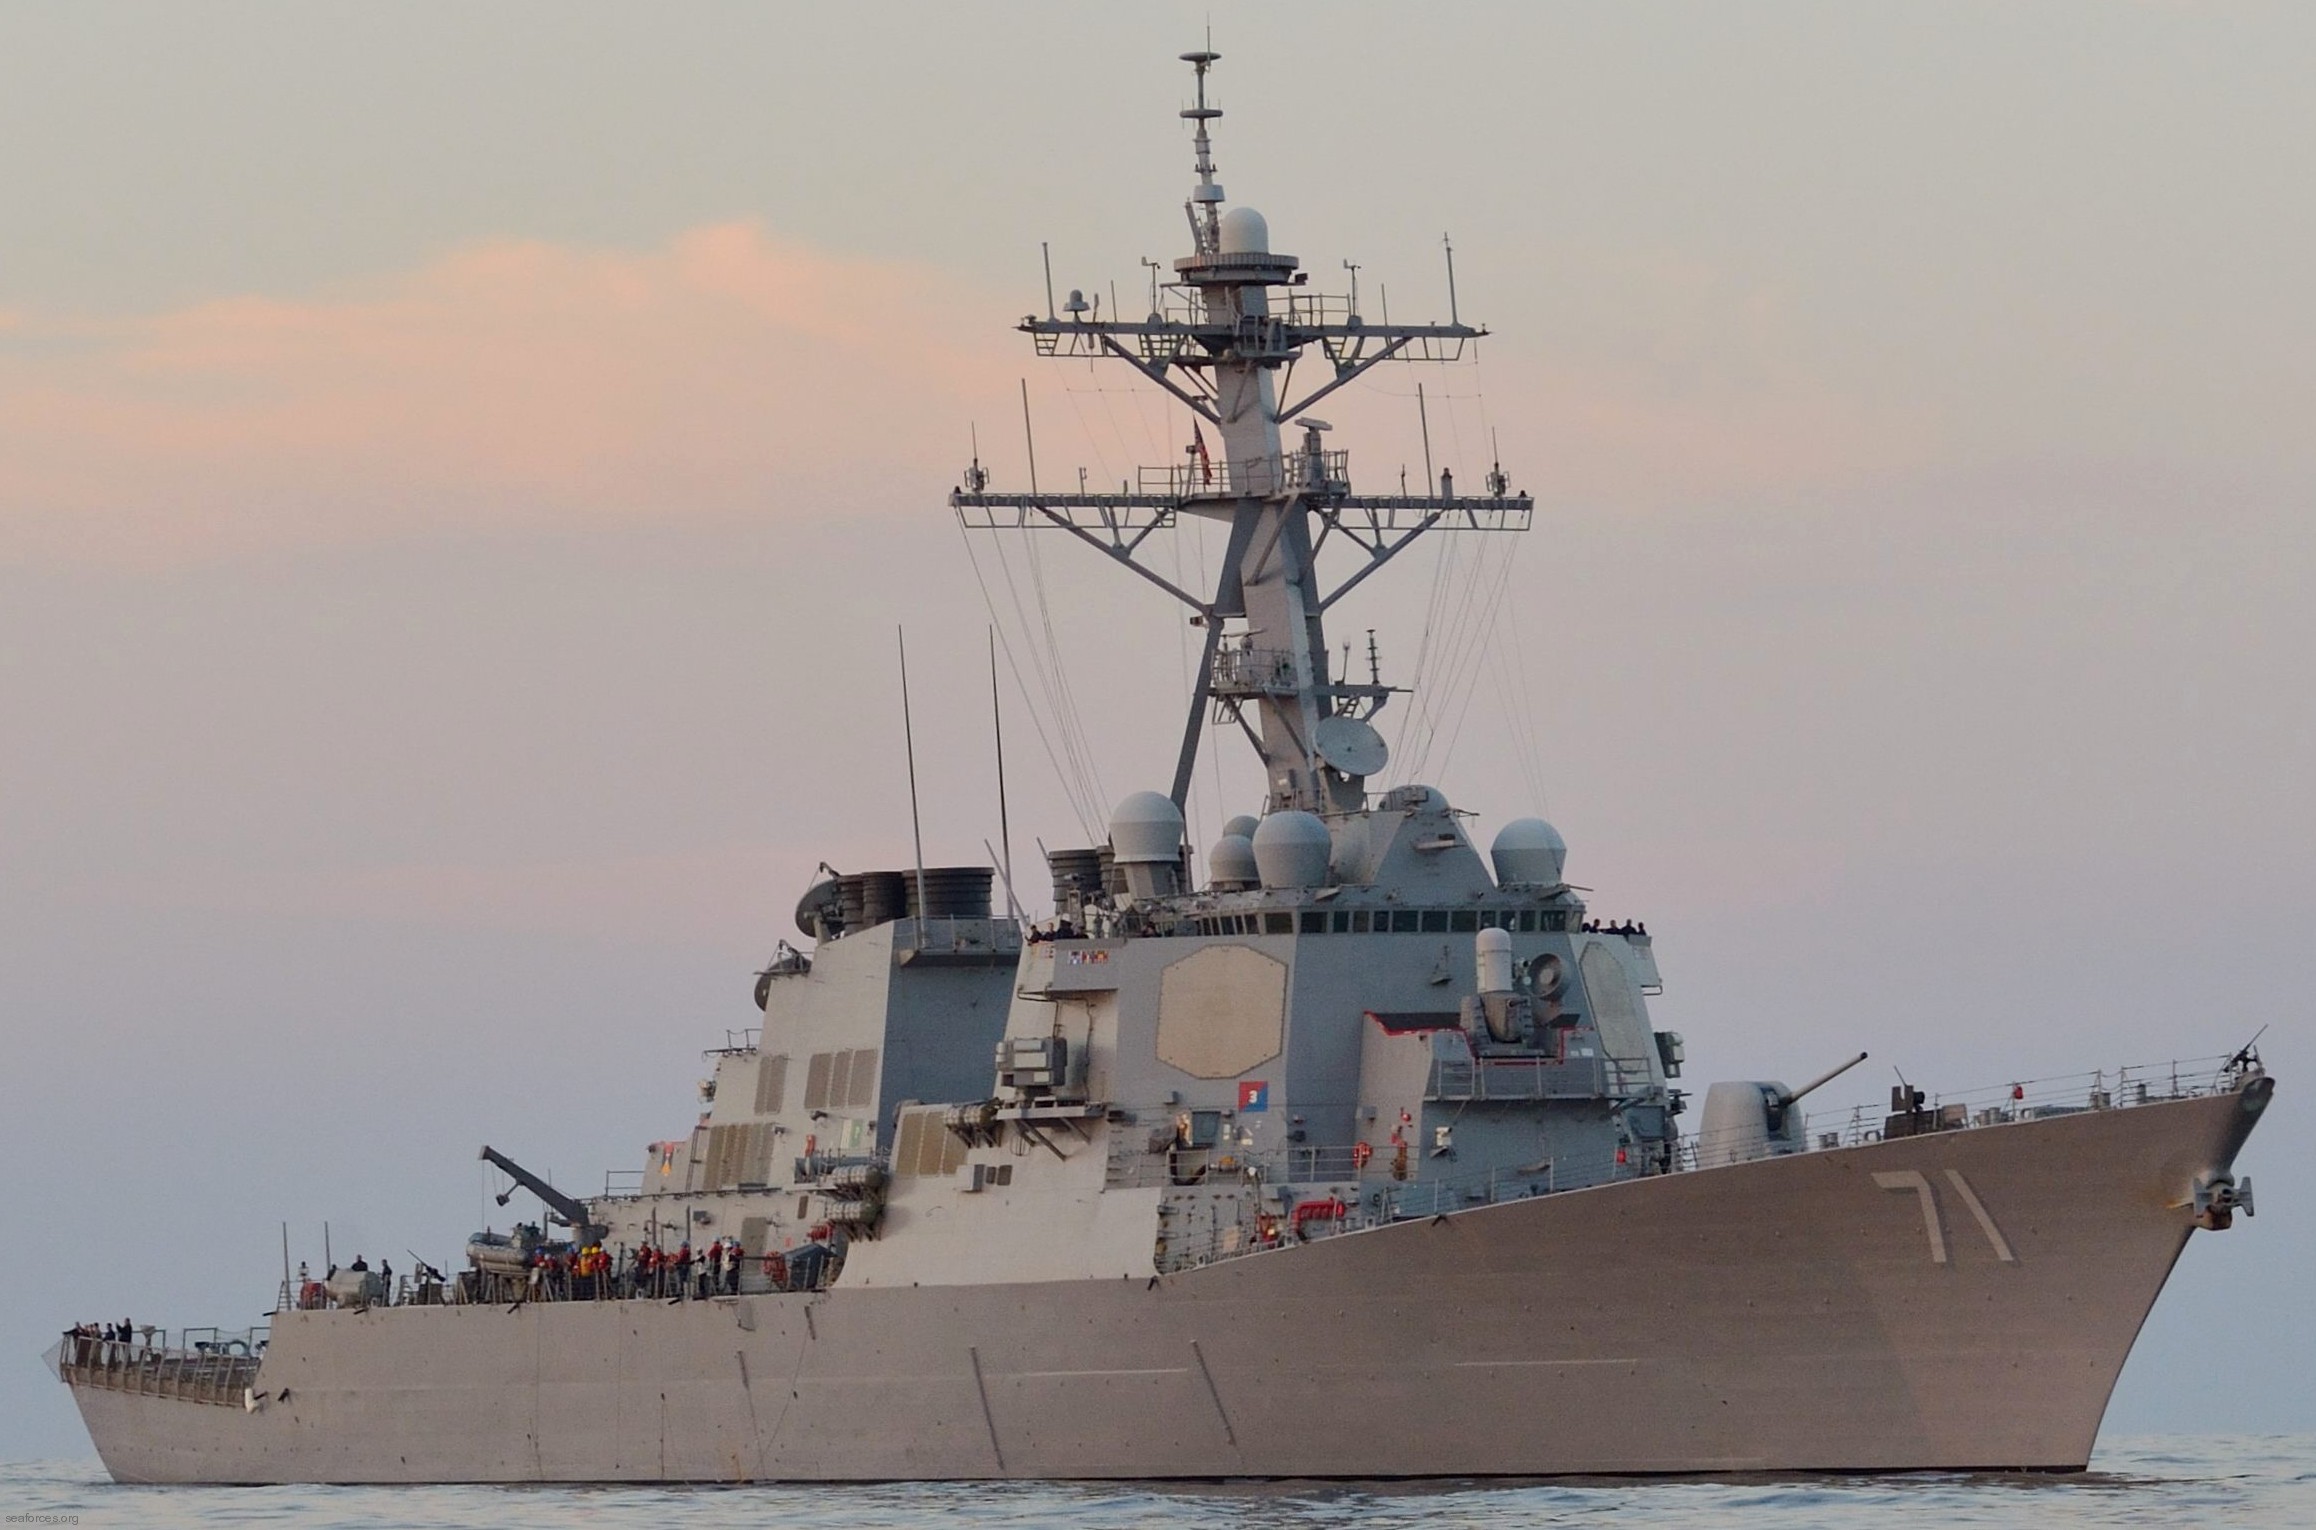 ddg-71 uss ross guided missile destroyer arleigh burke class aegis bmd 61 black sea